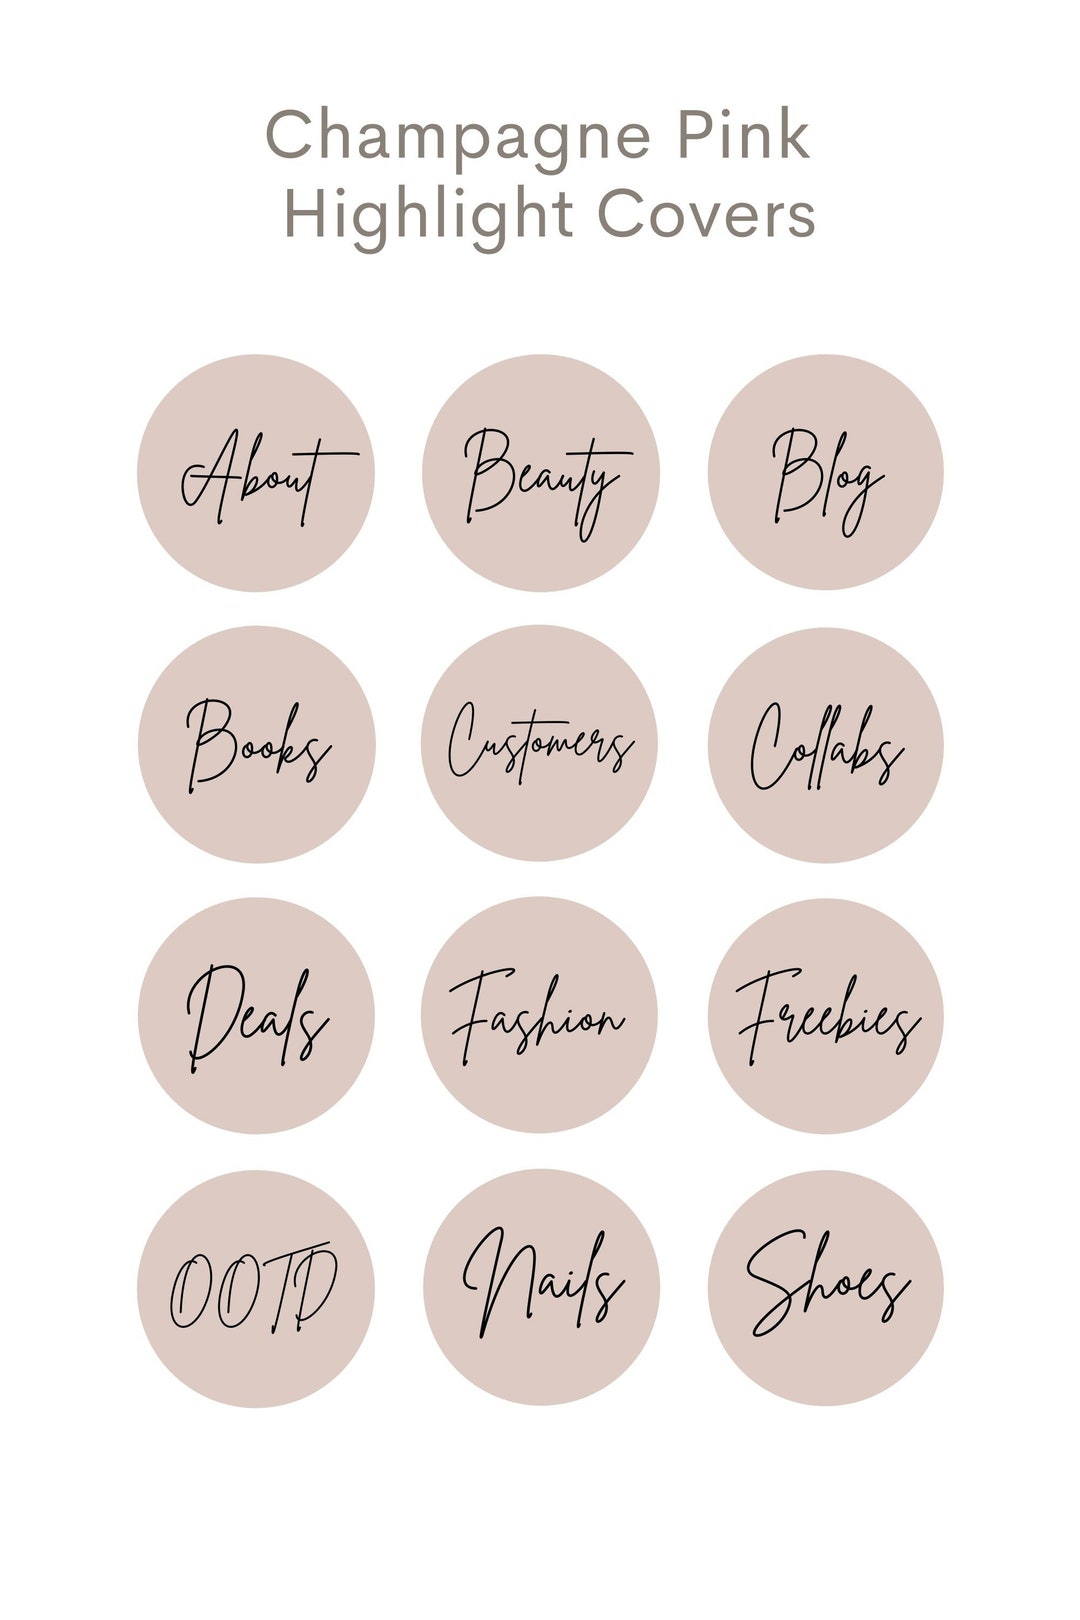 120 Instagram Highlight Icons Champagne Pink Instagram - Etsy